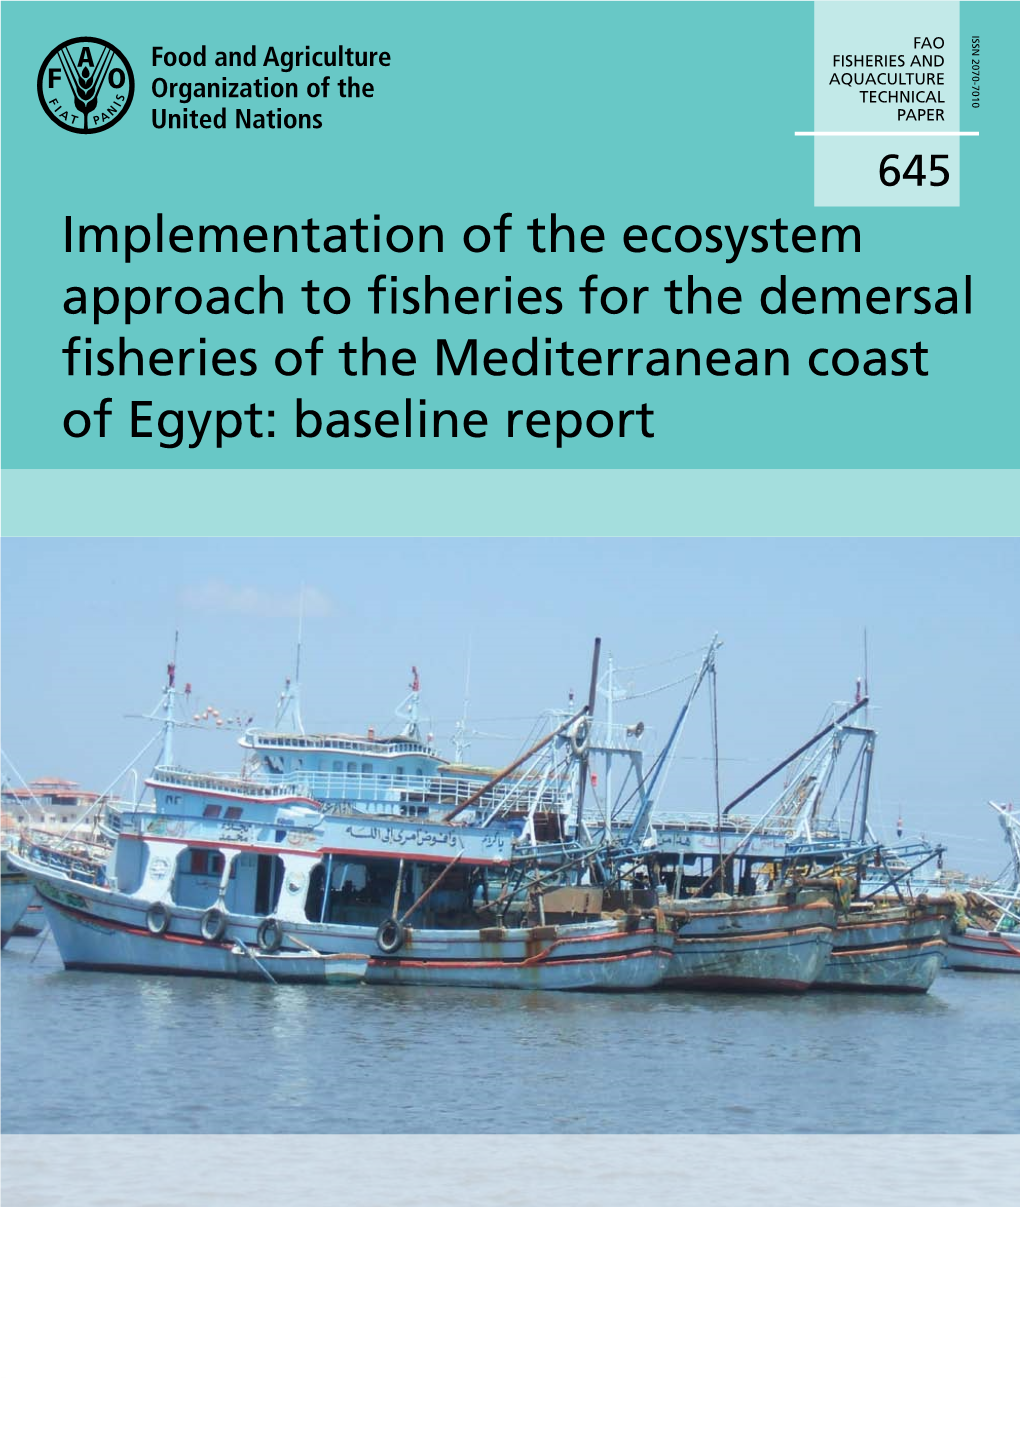 Implementation of the Ecosystem Approach to Fisheries for the Demersal Fisheries of the Mediterranean Coast of Egypt: Baseline Report